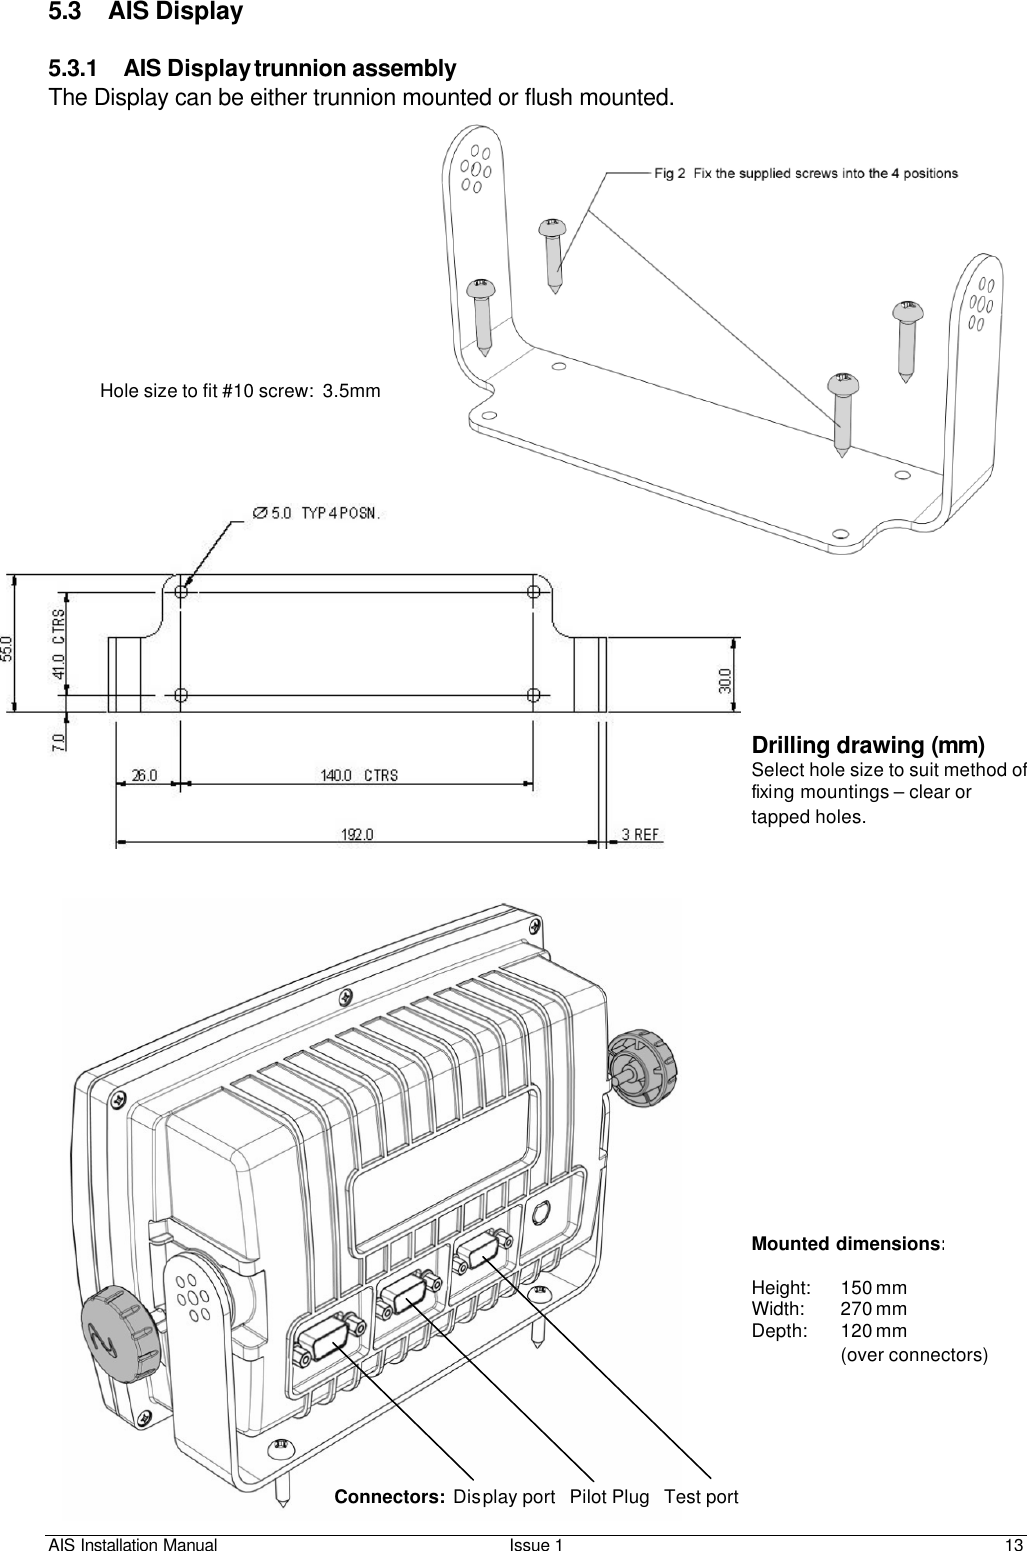 AIS Installation Manual Issue 1 13     5.3 AIS Display  5.3.1 AIS Display trunnion assembly  The Display can be either trunnion mounted or flush mounted.           Hole size to fit #10 screw:  3.5mm Drilling drawing (mm) Select hole size to suit method of fixing mountings – clear or tapped holes. Mounted dimensions:  Height:    150 mm Width:   270 mm Depth:   120 mm (over connectors) Connectors:  Display port   Pilot Plug   Test port 